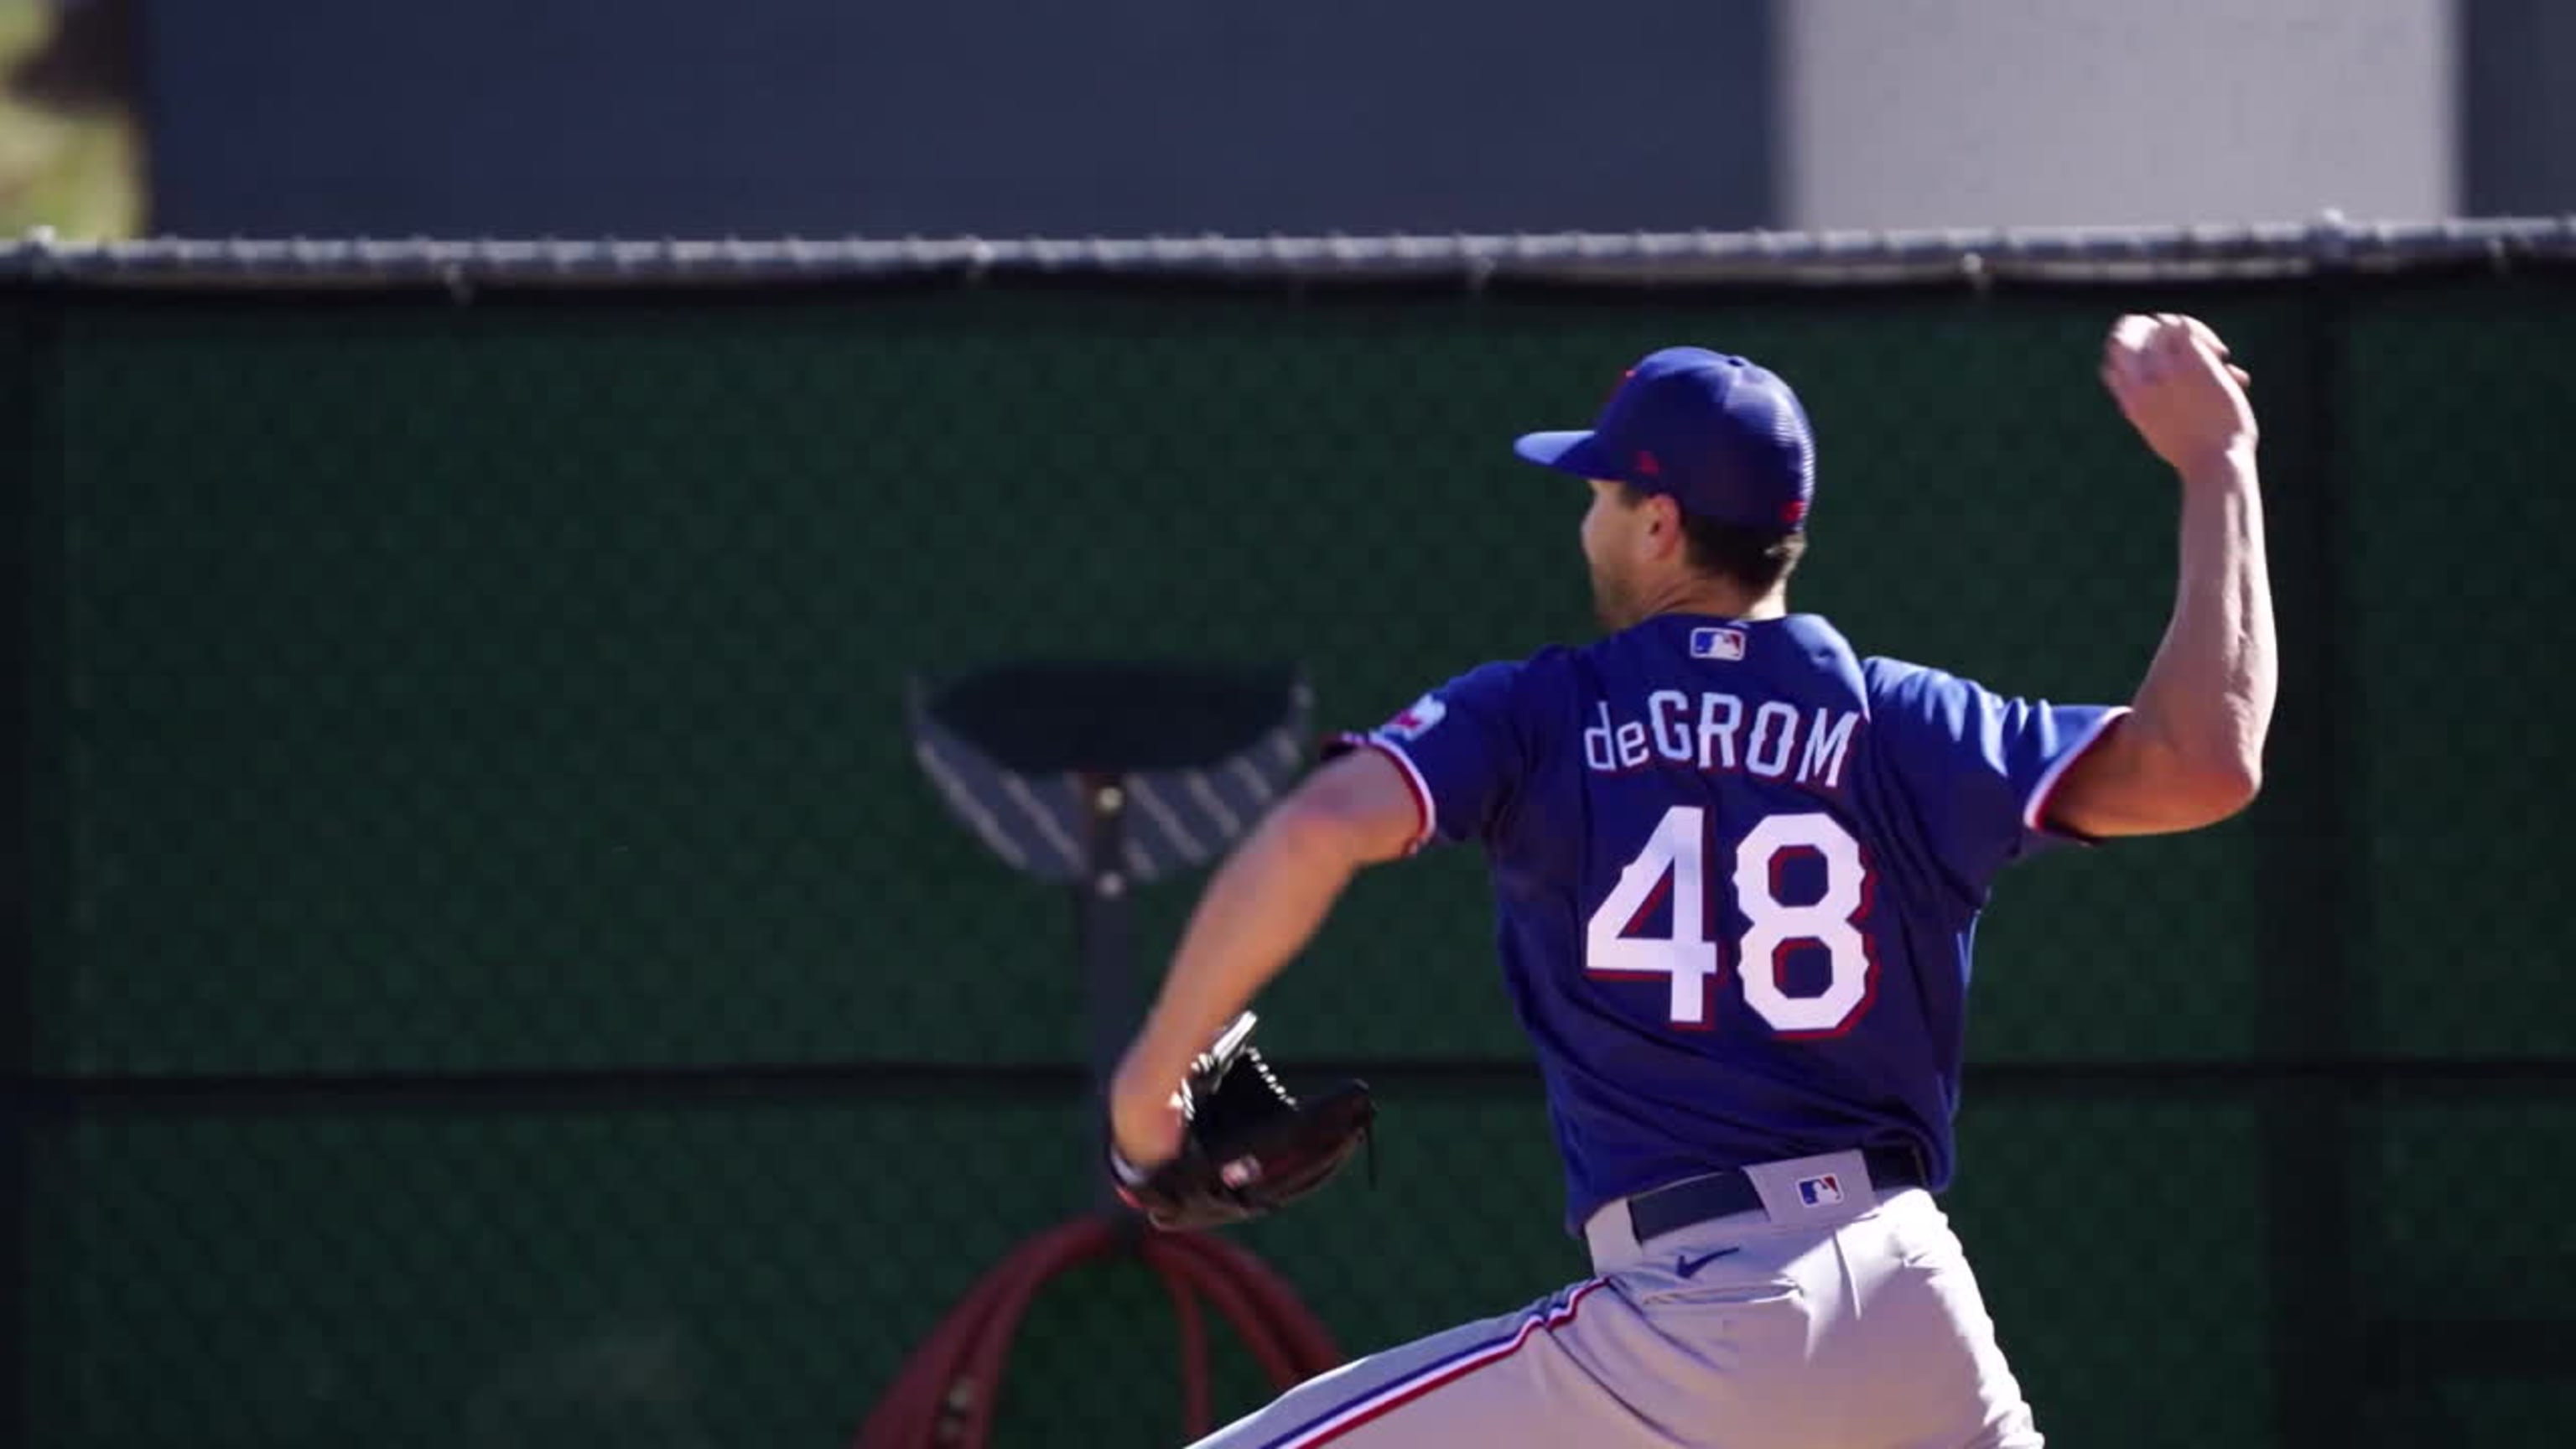 Rangers plan to get Jacob deGrom's 'arm moving again' after four-day break